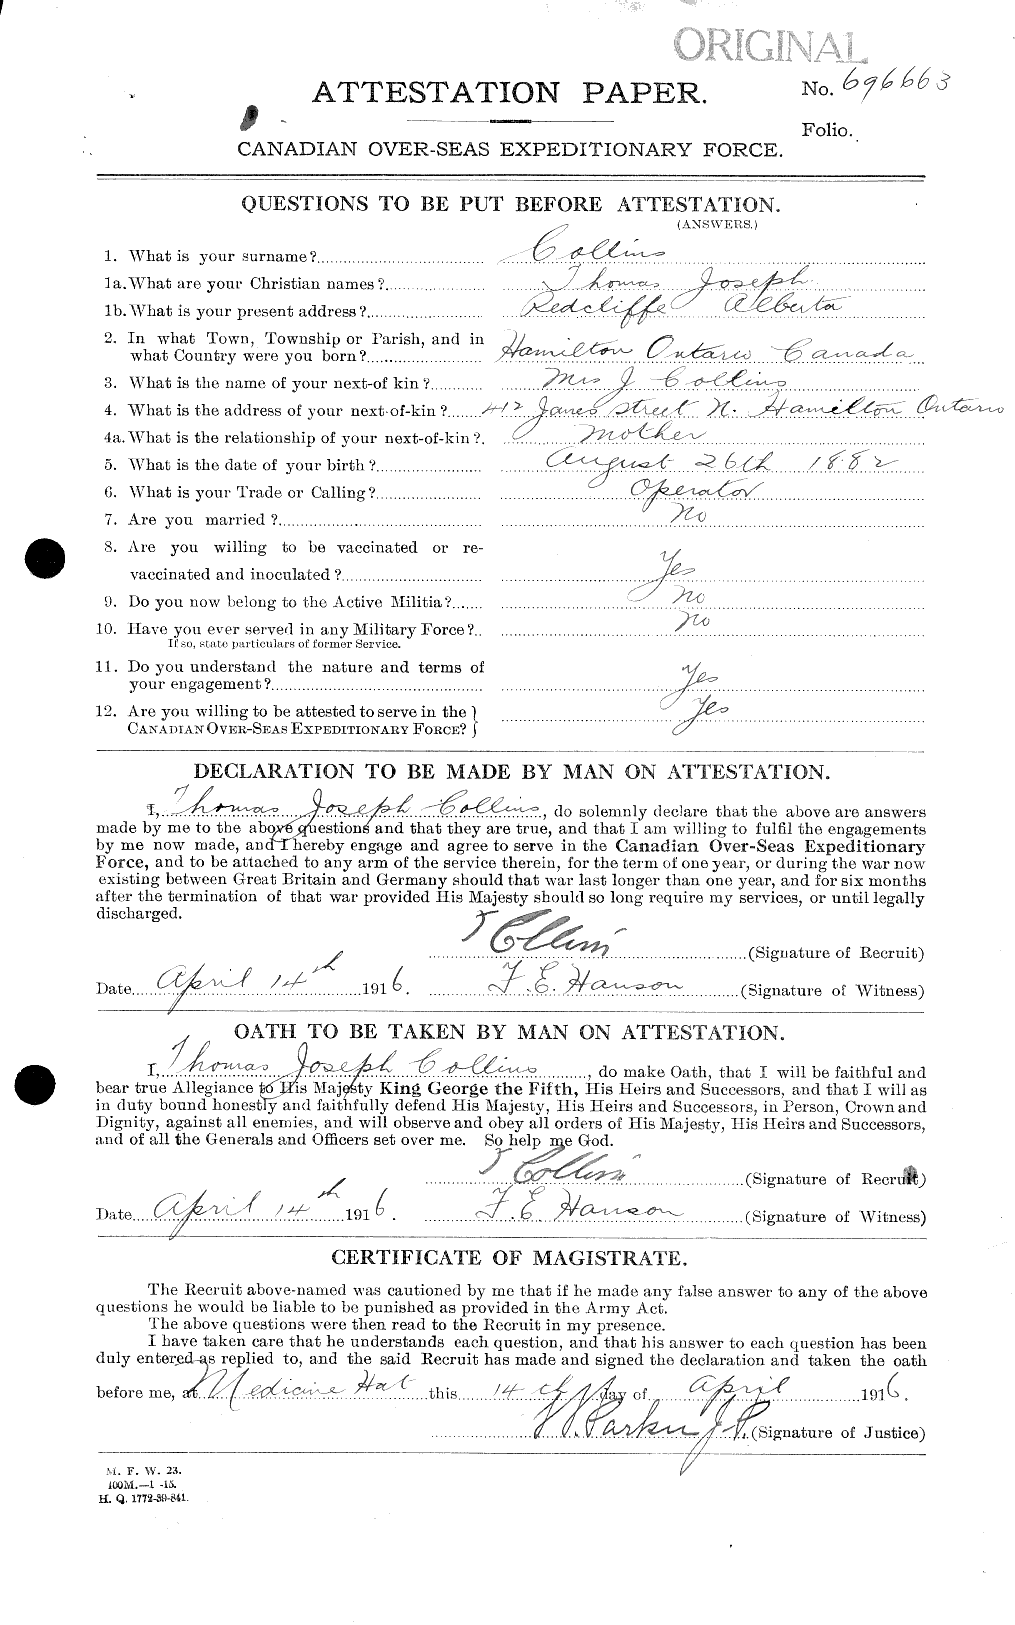 Personnel Records of the First World War - CEF 040668a